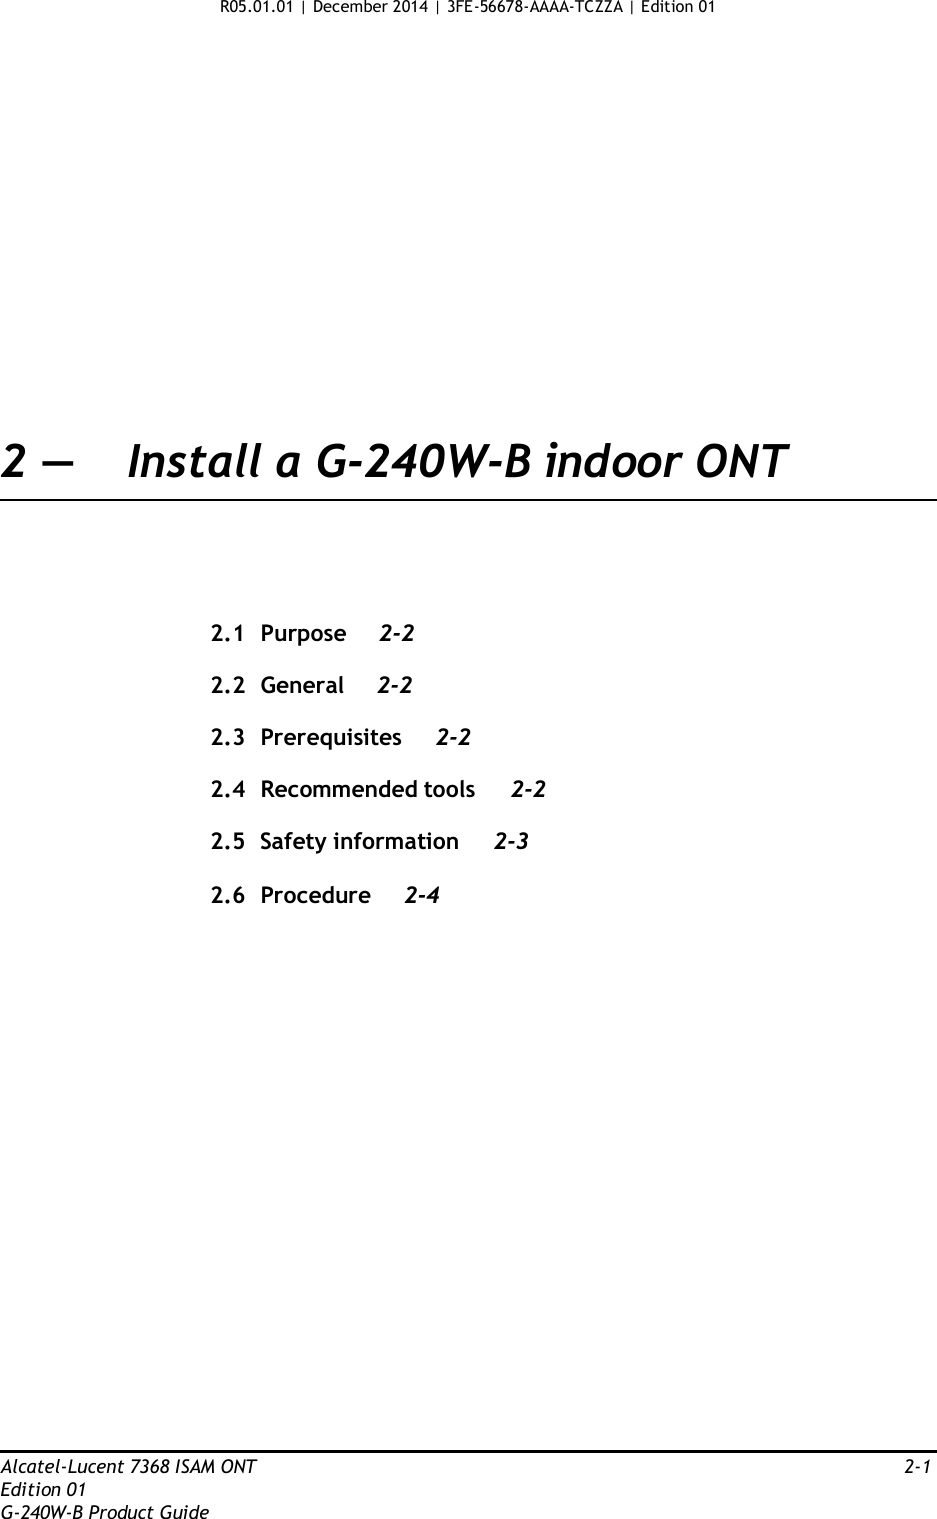 R05.01.01 | December 2014 | 3FE-56678-AAAA-TCZZA | Edition 01                      2 —  Install a G-240W-B indoor ONT       2.1  Purpose  2-2  2.2  General 2-2  2.3  Prerequisites 2-2  2.4  Recommended tools  2-2  2.5  Safety information  2-3  2.6  Procedure  2-4                           Alcatel-Lucent 7368 ISAM ONT  2-1 Edition 01 G-240W-B Product Guide 